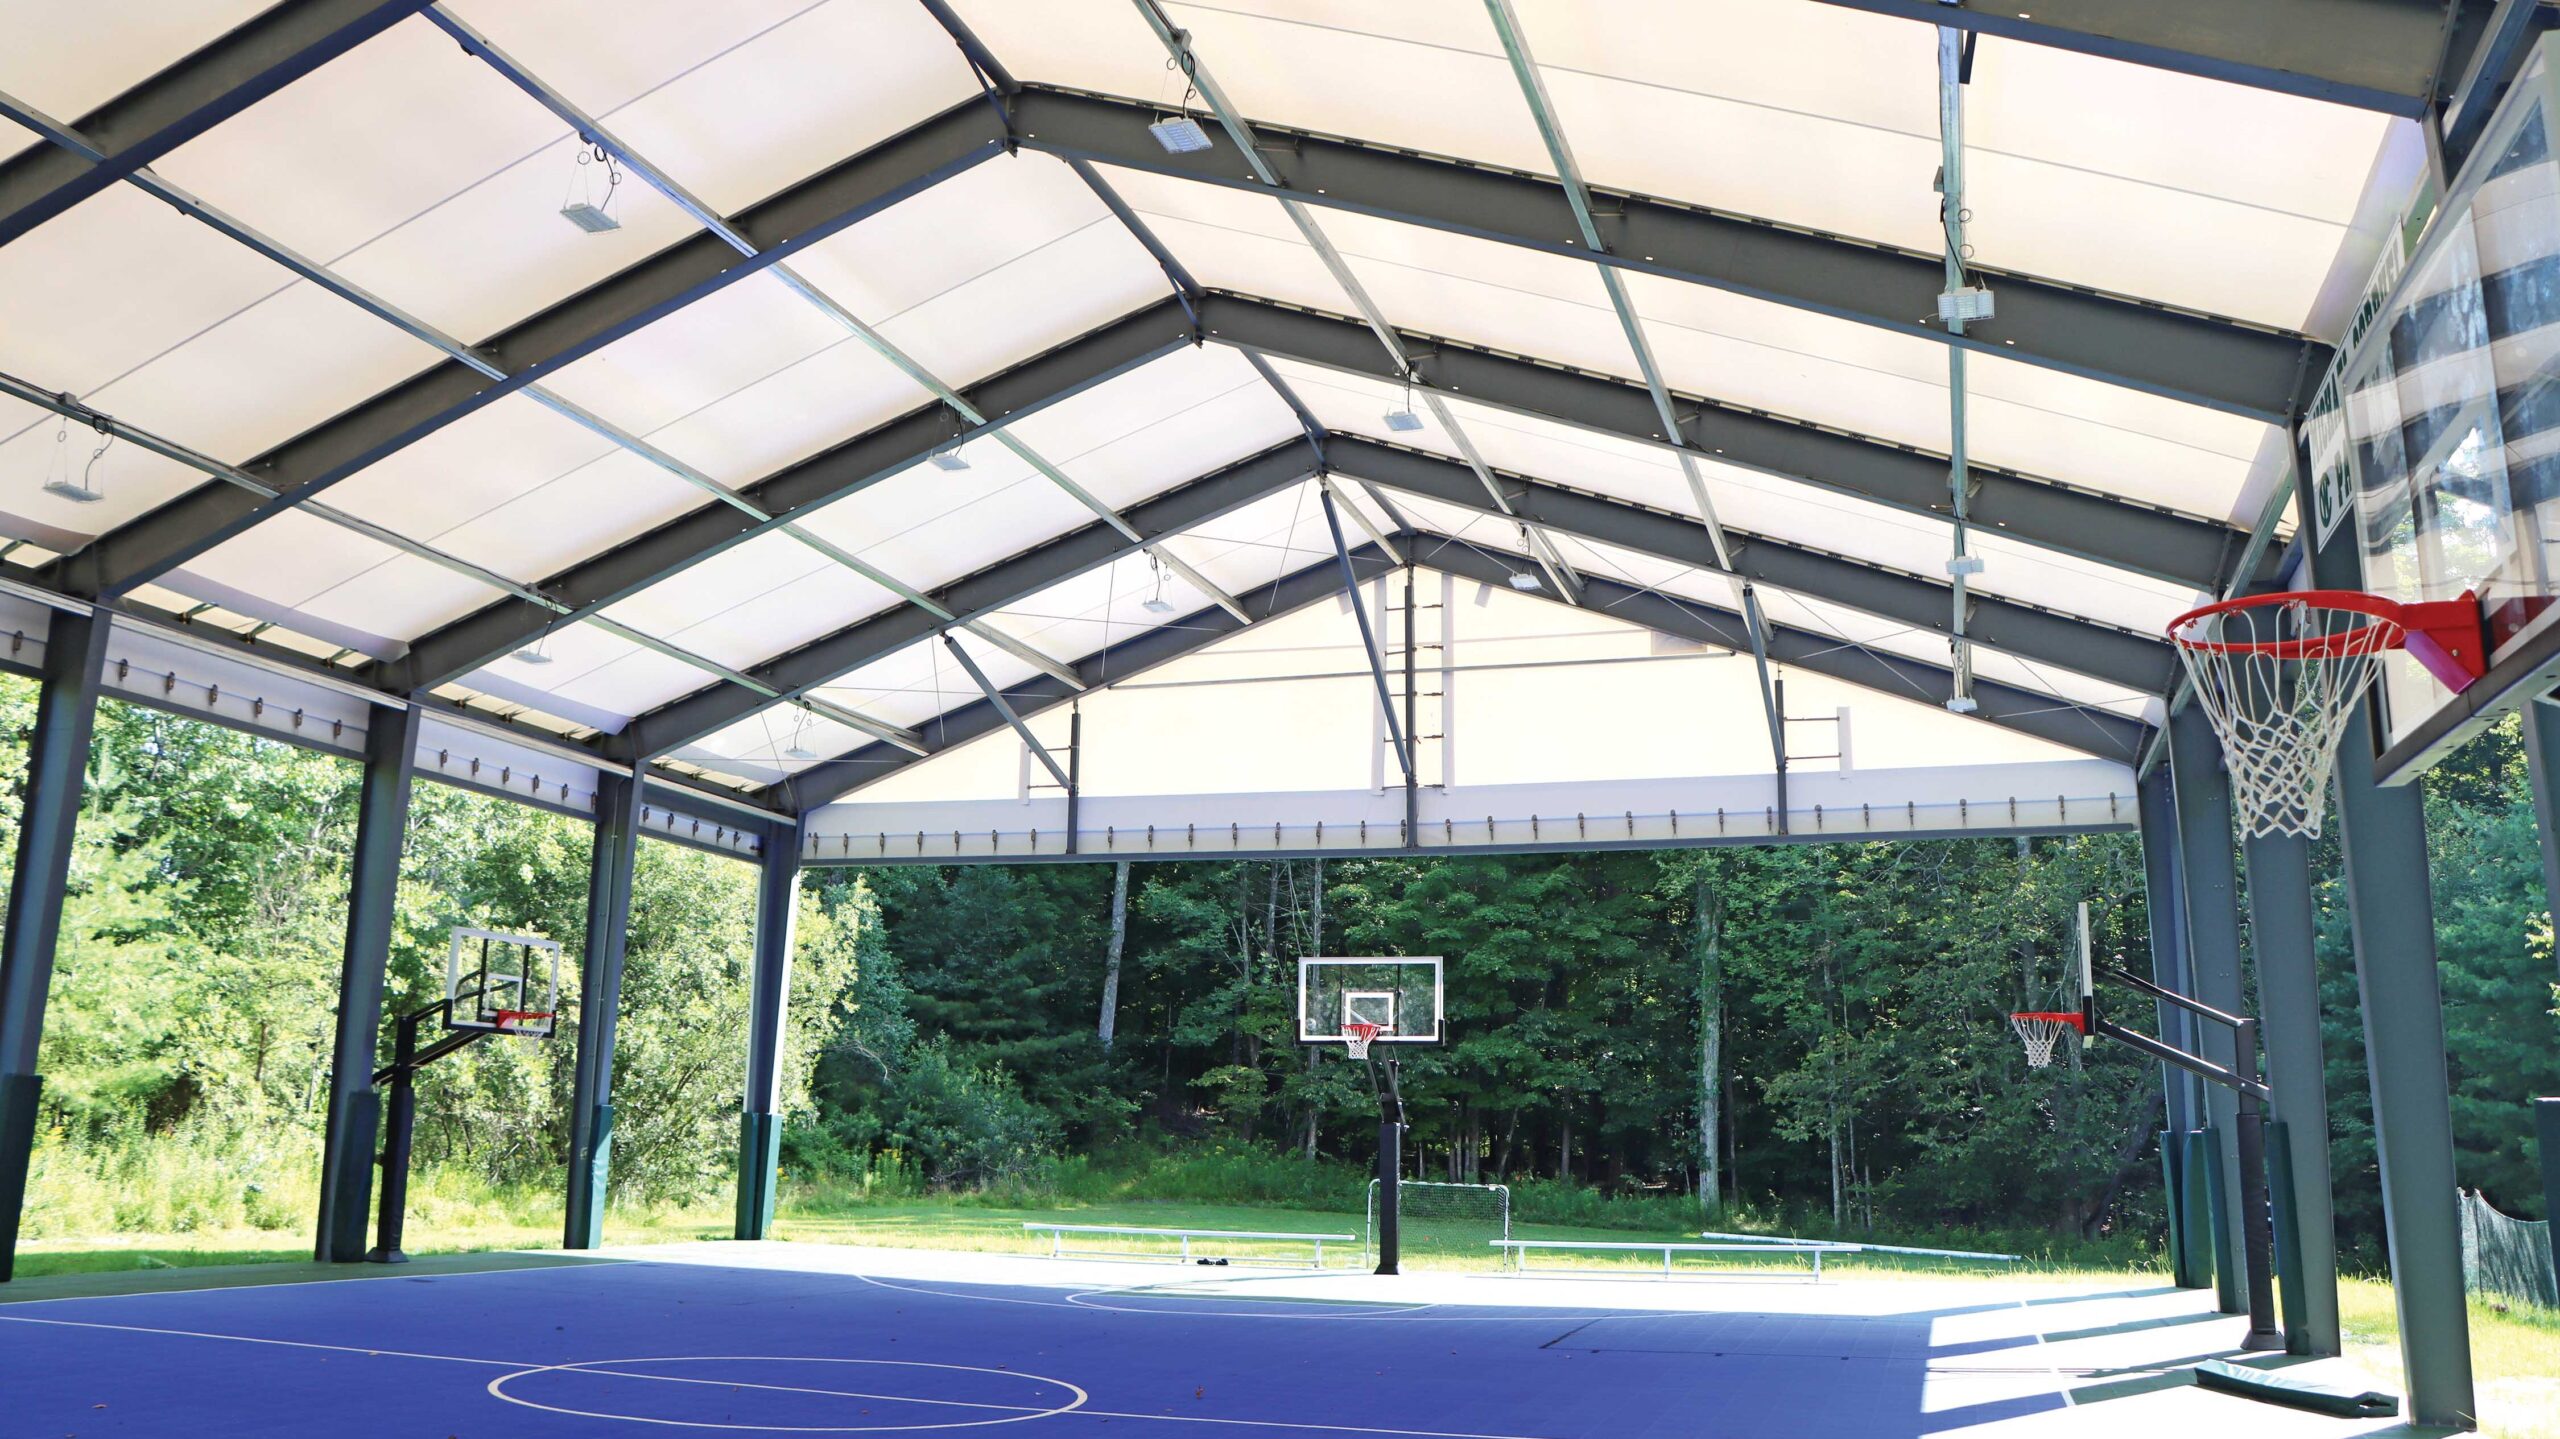 Fabric Pavilion Building used to cover basketball courts